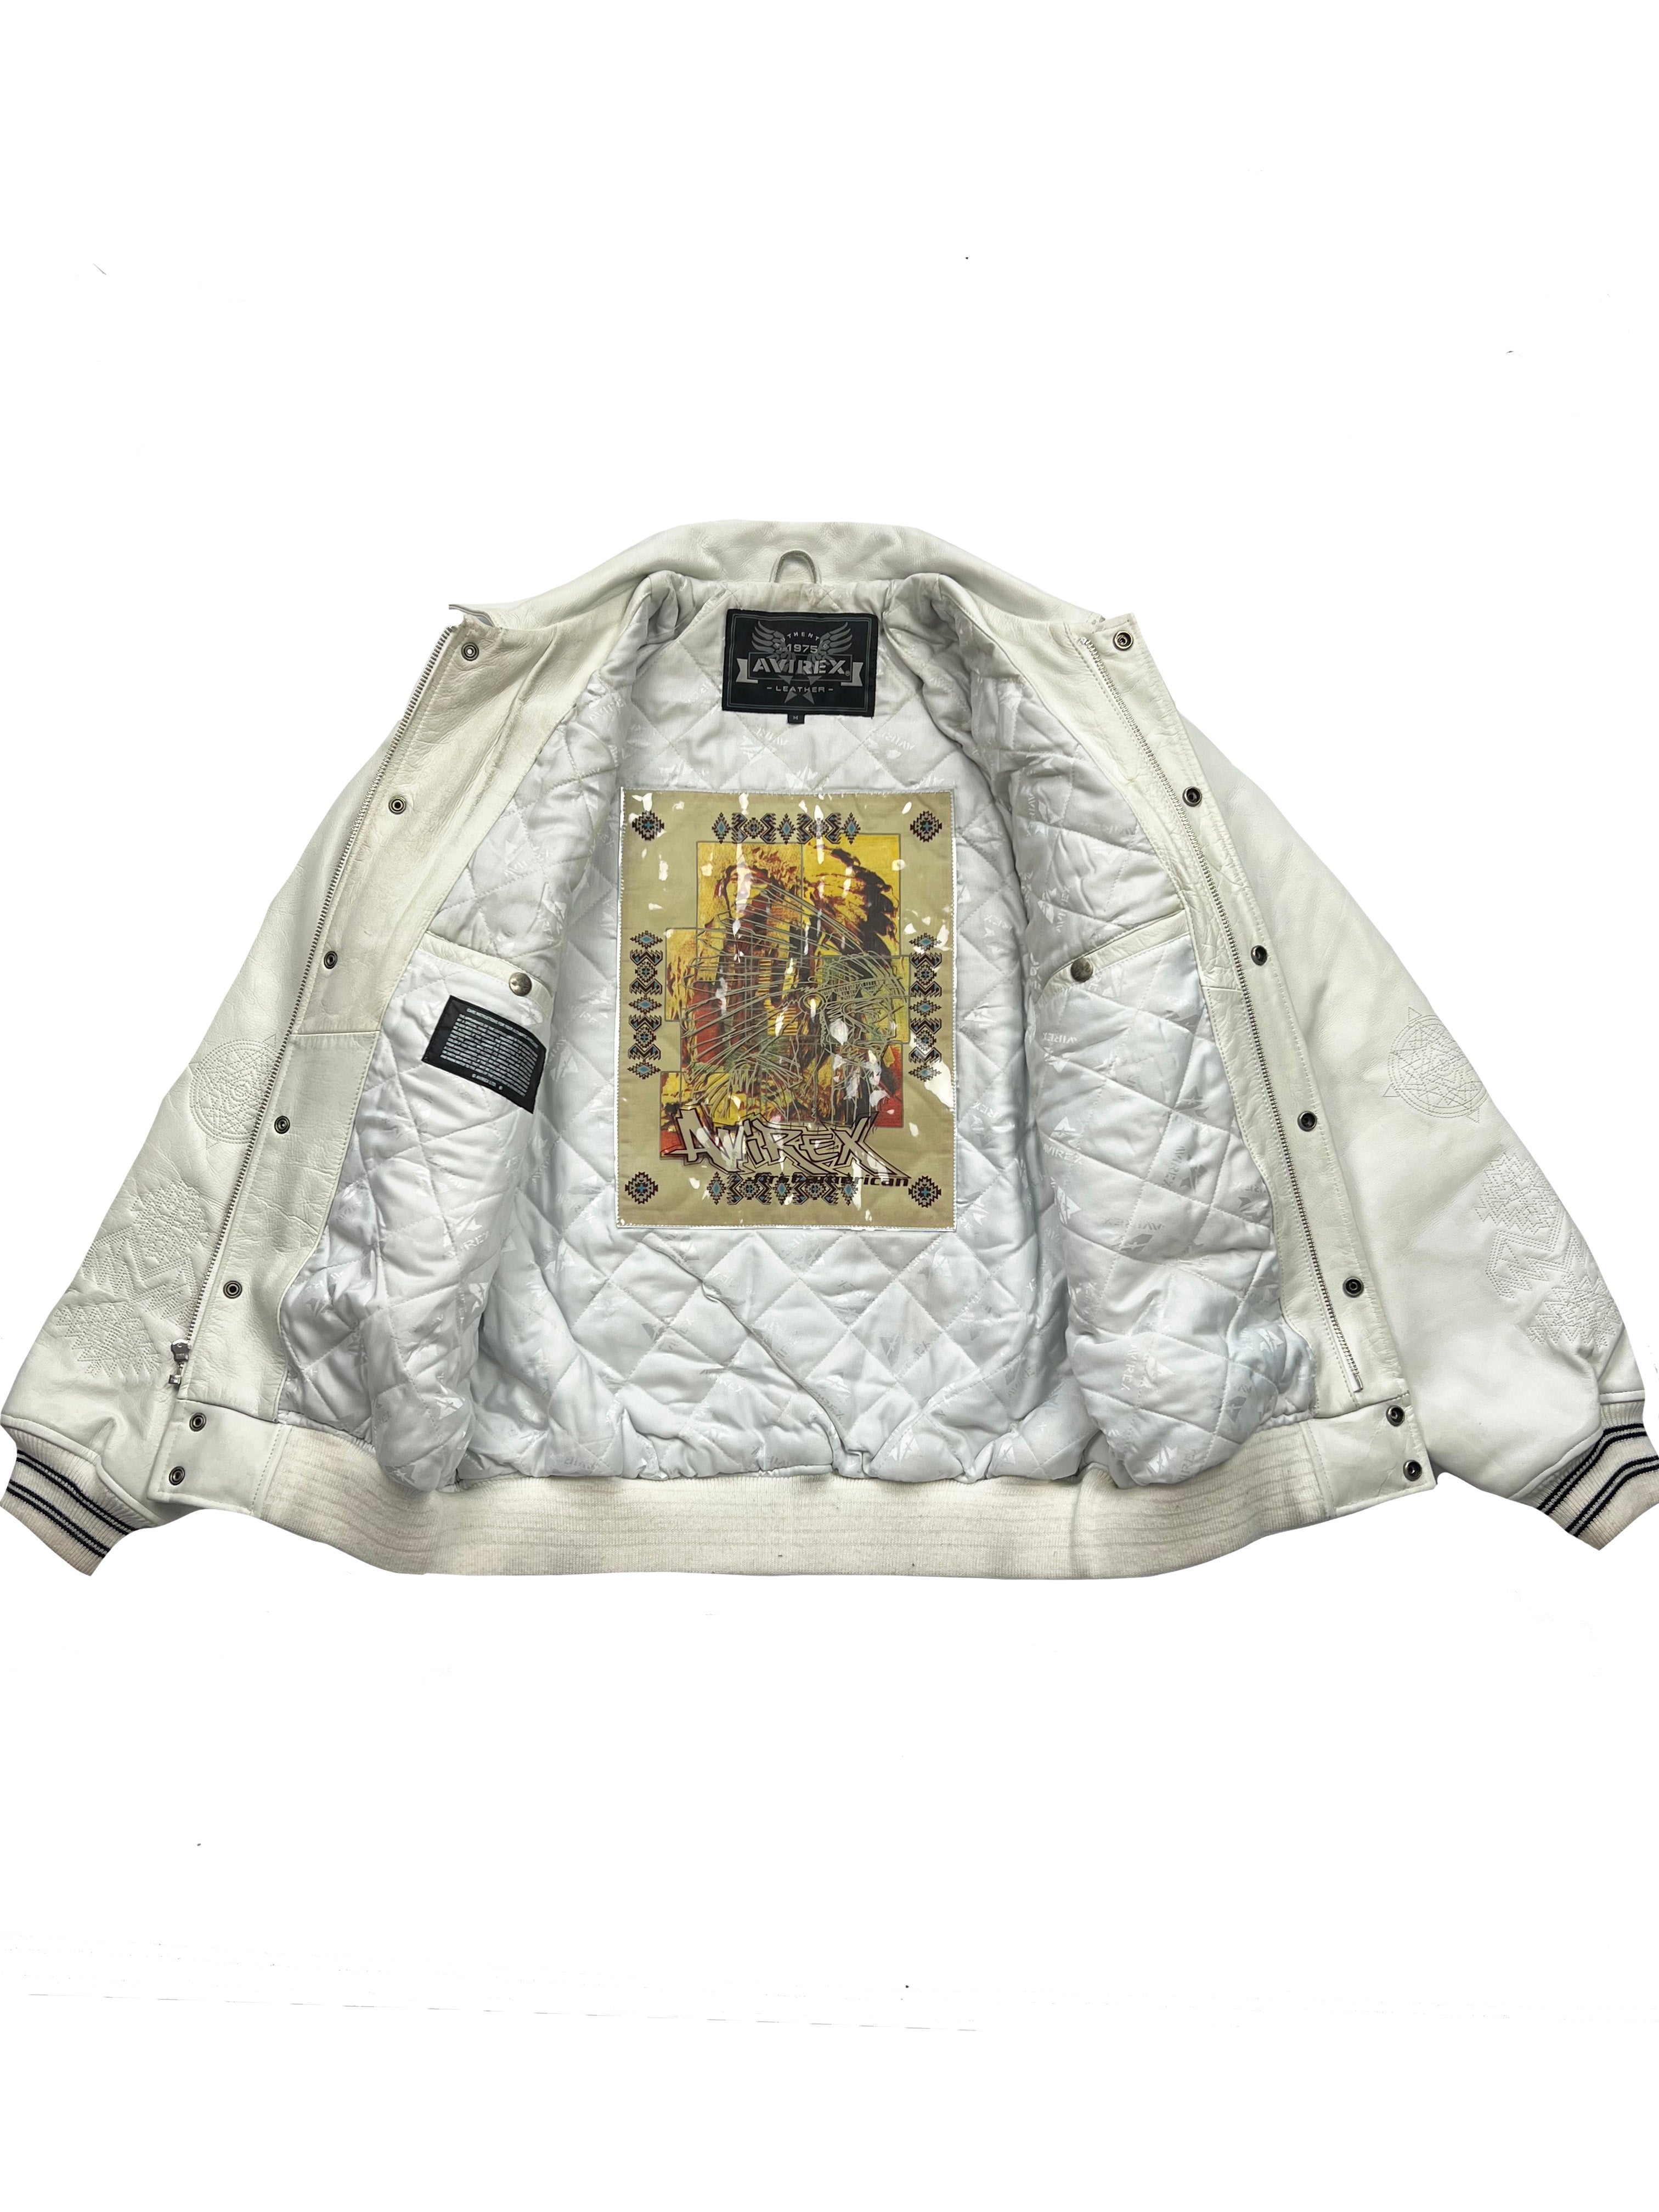 Avirex 'First American' White Leather Jacket 00's